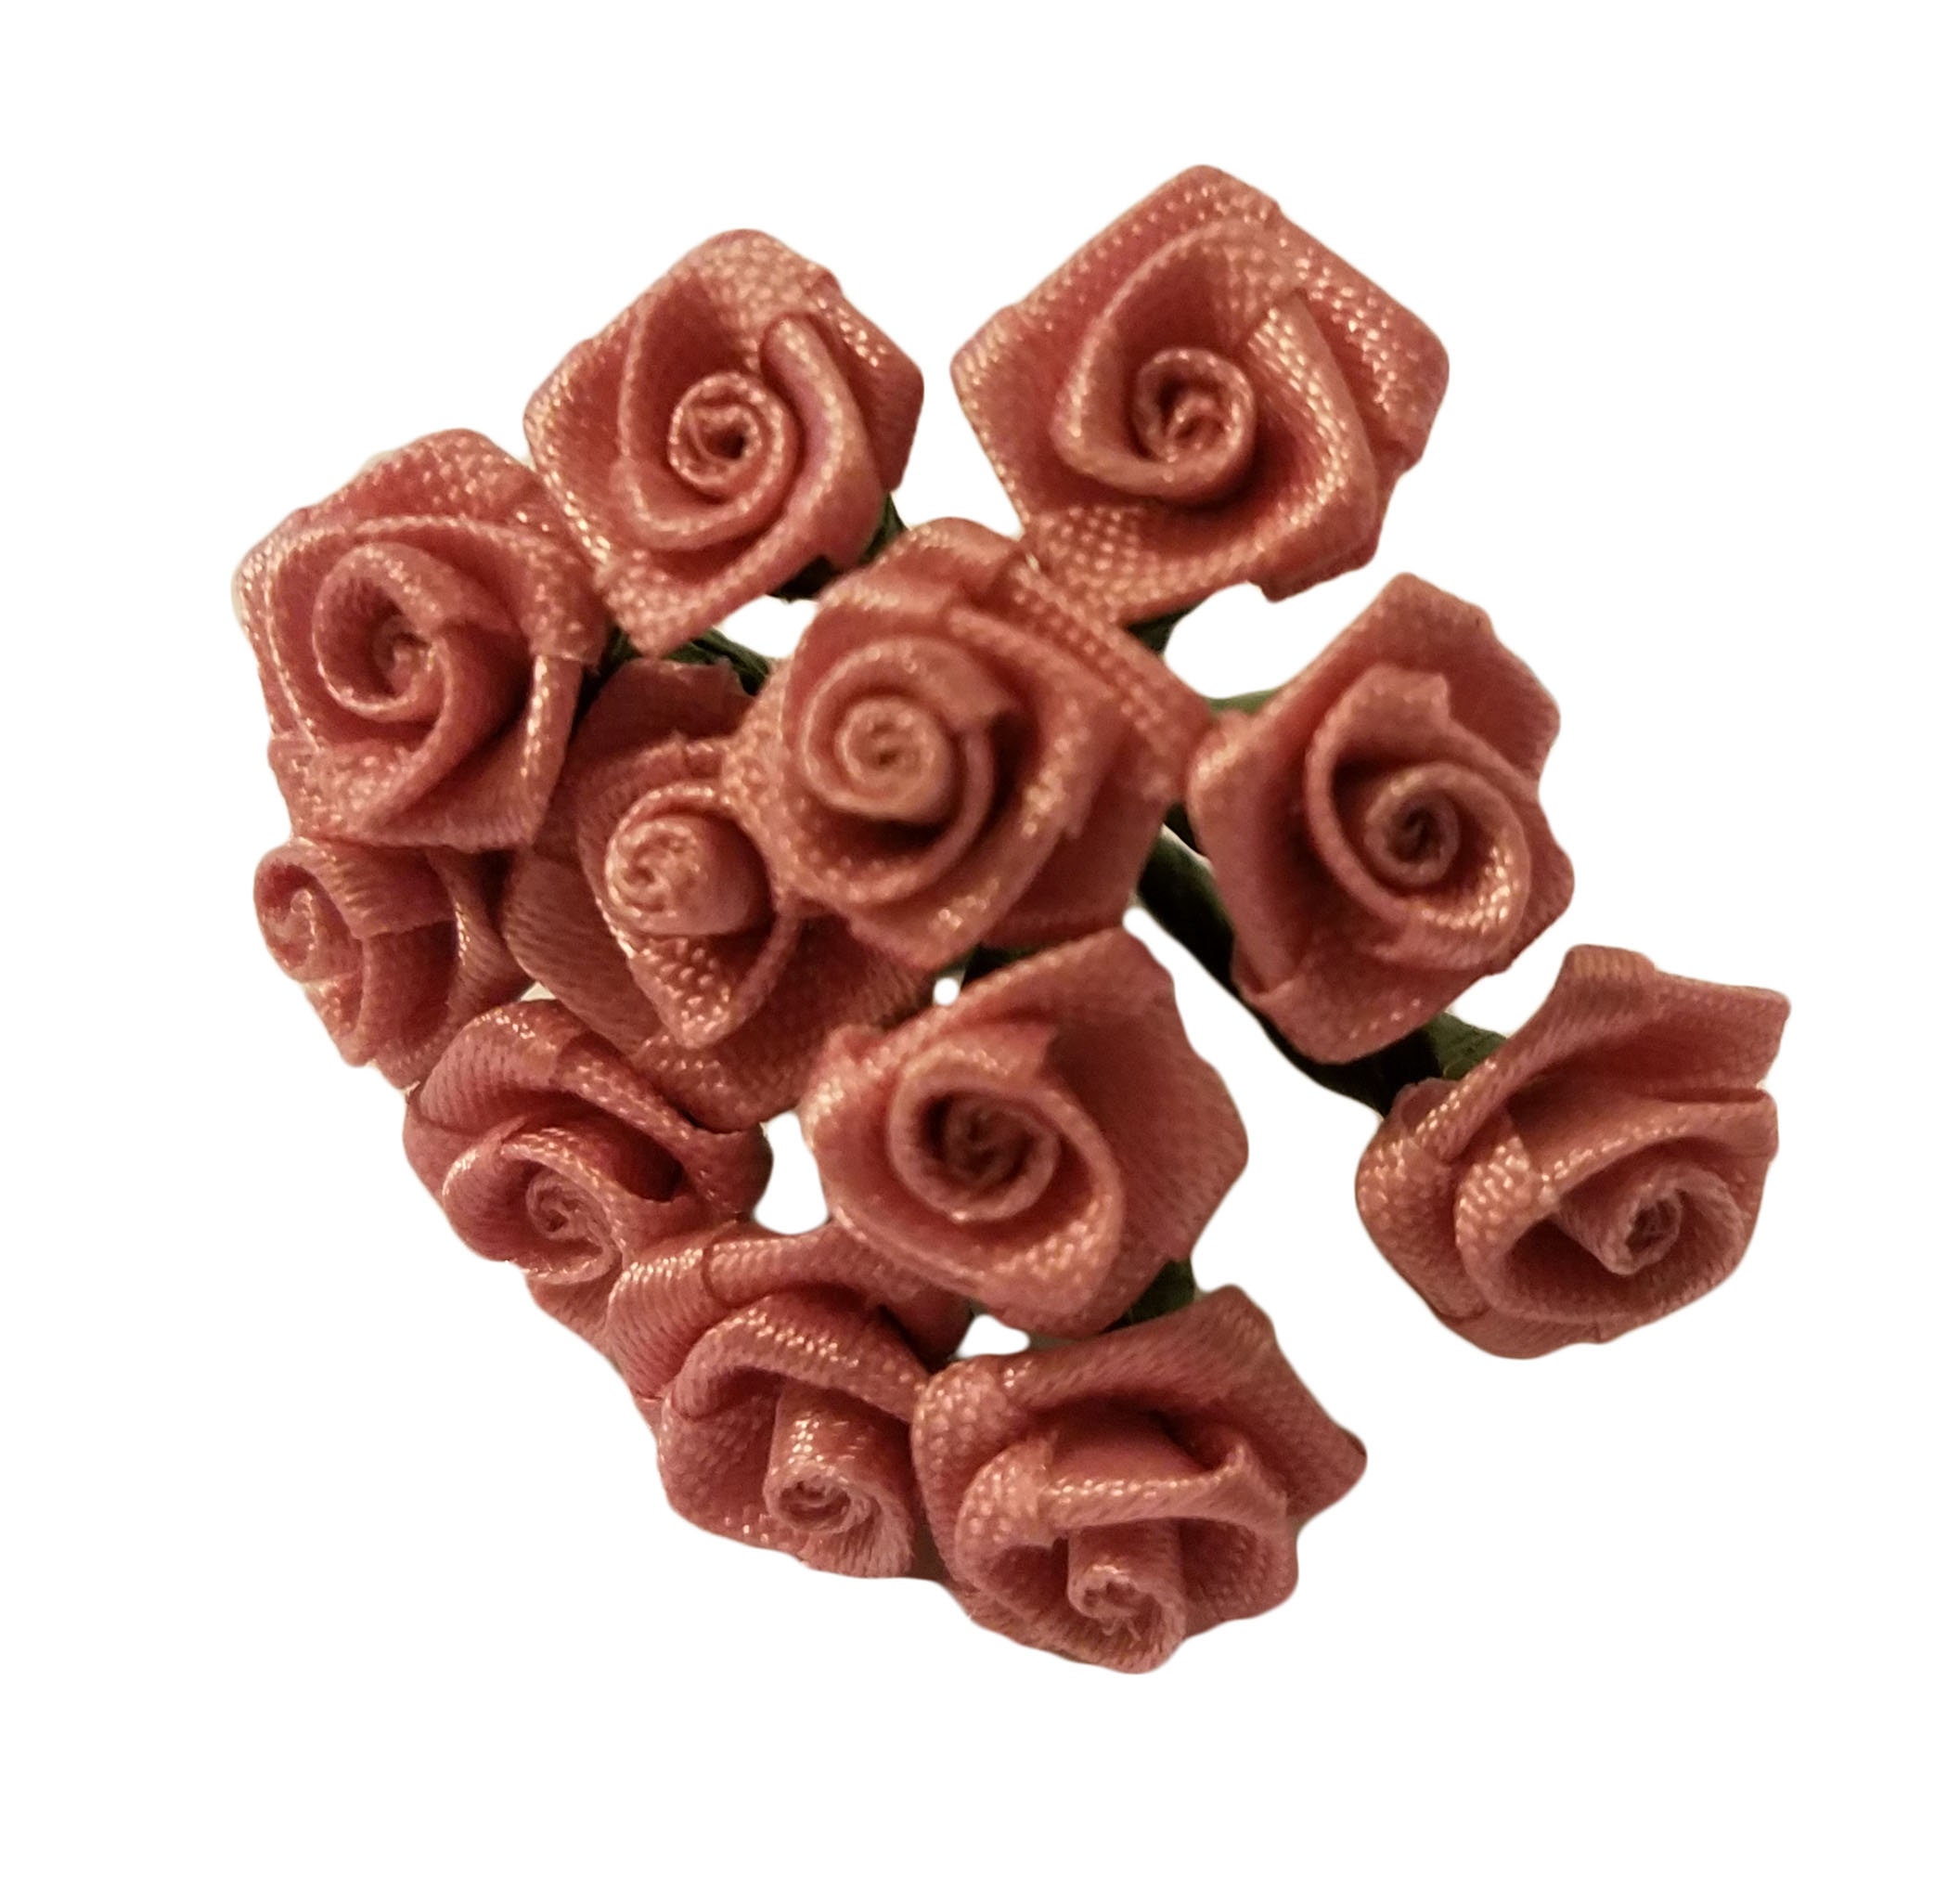  500 Pieces Mini Ribbon Roses, Multicolor Rosettes Flowers  Artificial Flowers for Crafts, Small Ribbon Bows Roses Flowers with Leaf  Craft Ornament for Sewing DIY Craft Wedding Festival Decoration : אמנות,  יצירה